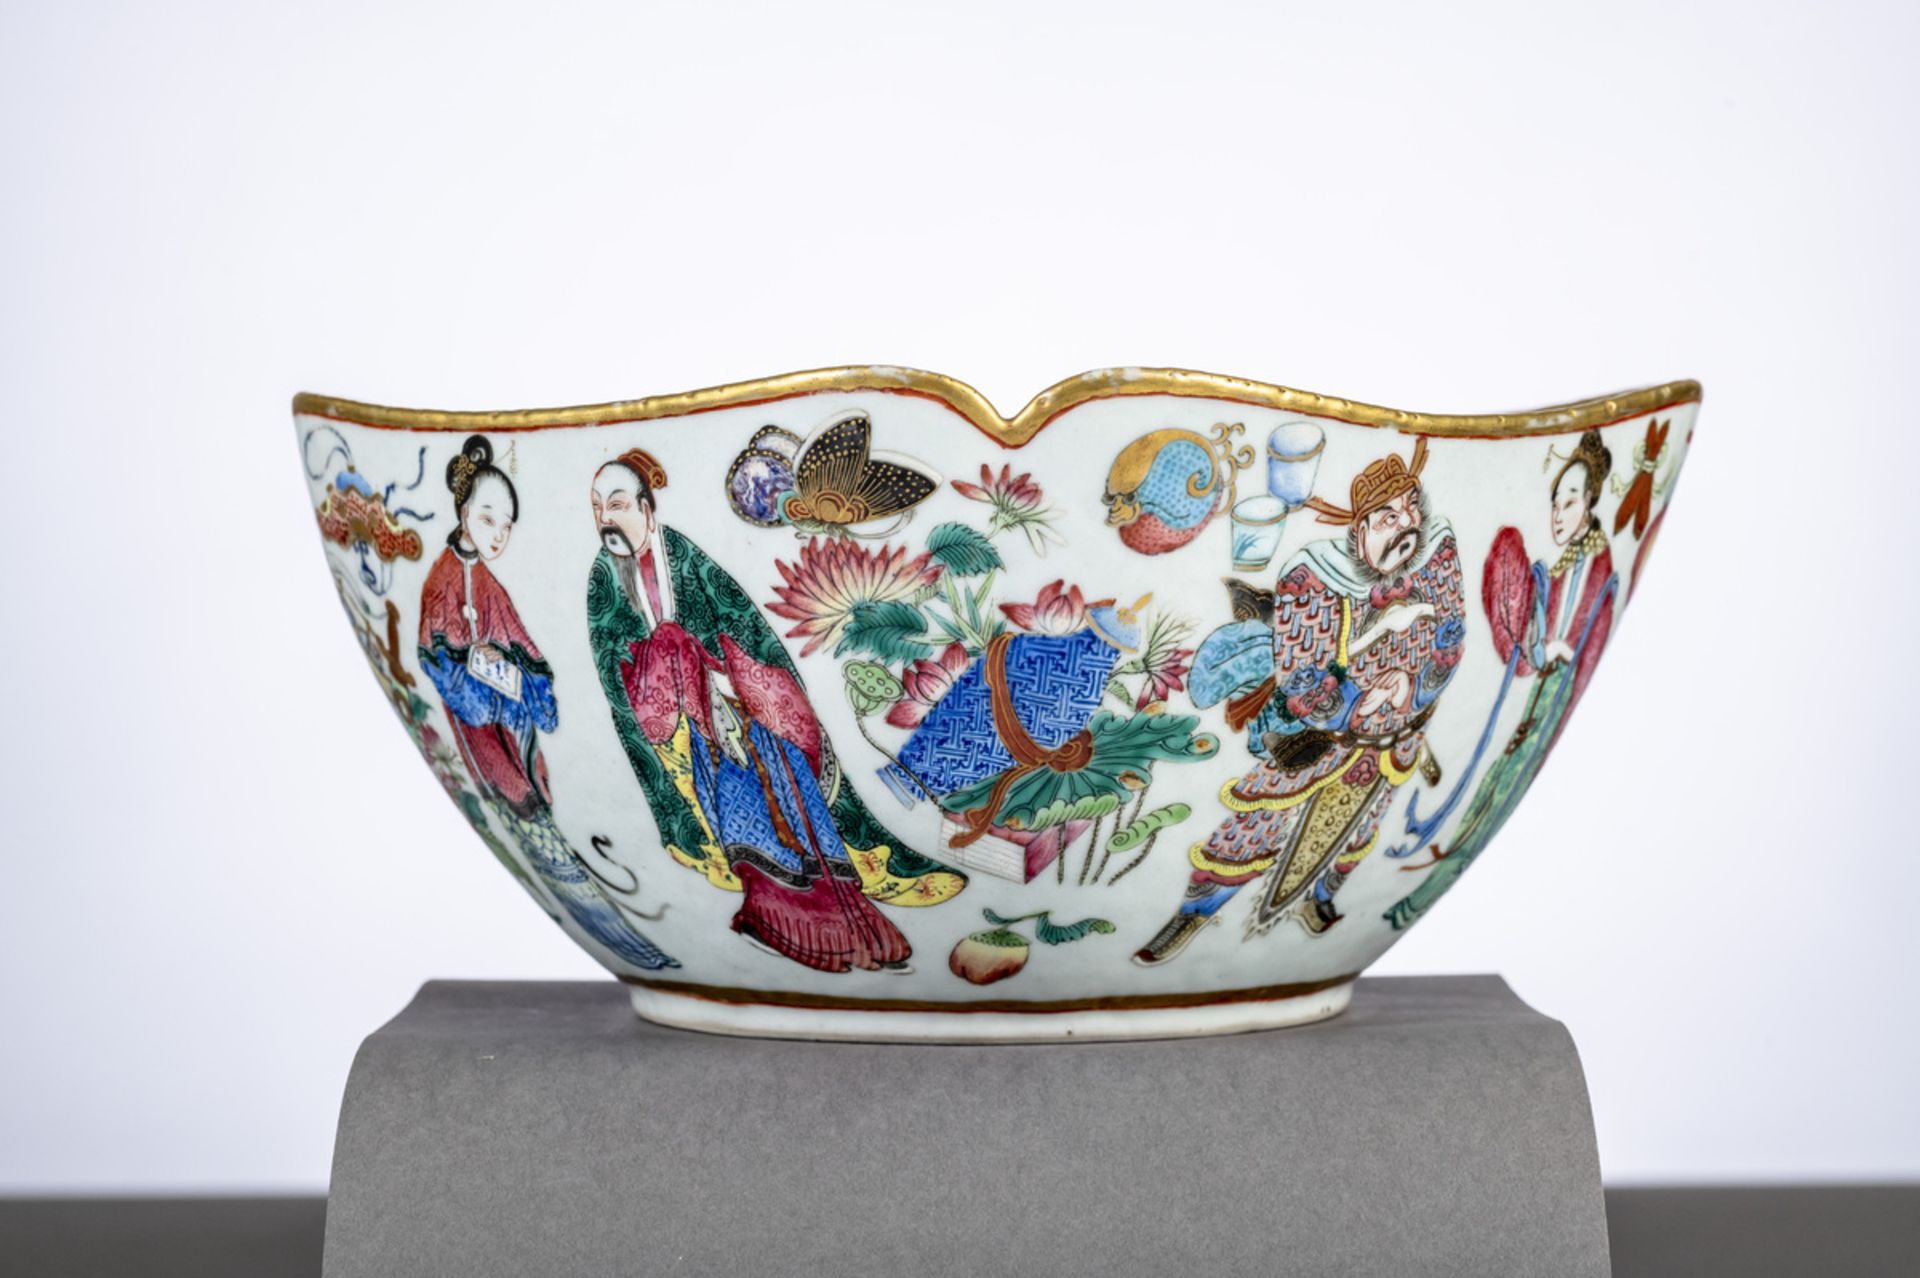 Lobed bowl in Chinese famille rose porcelain with gold rims 'characters', 19th century (11x24x24cm) - Image 2 of 5